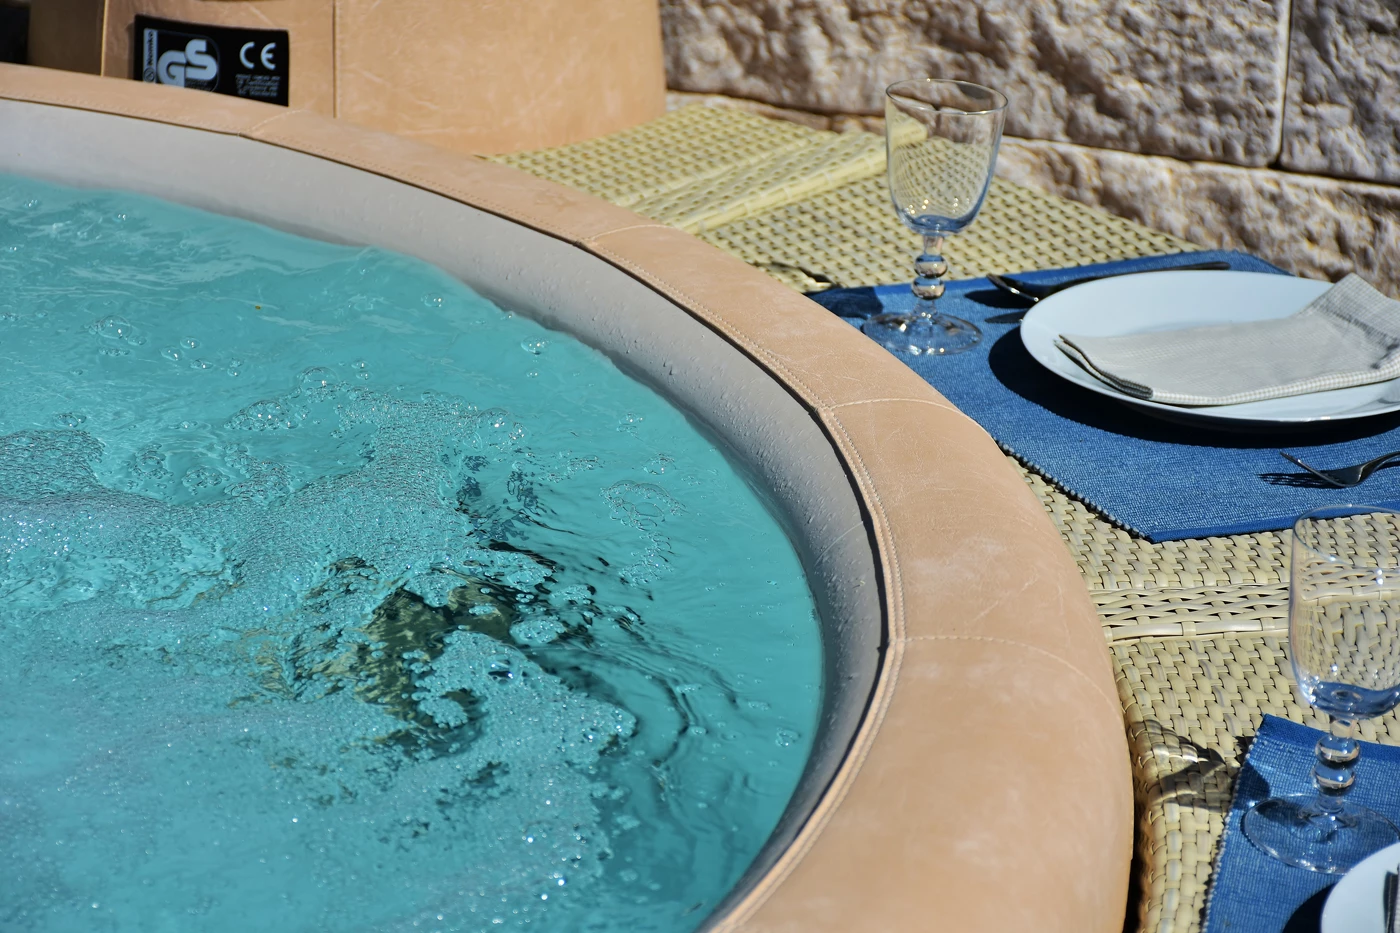 The side of a bubbling Jacuzzi with cups and cutlery set around the edge of it